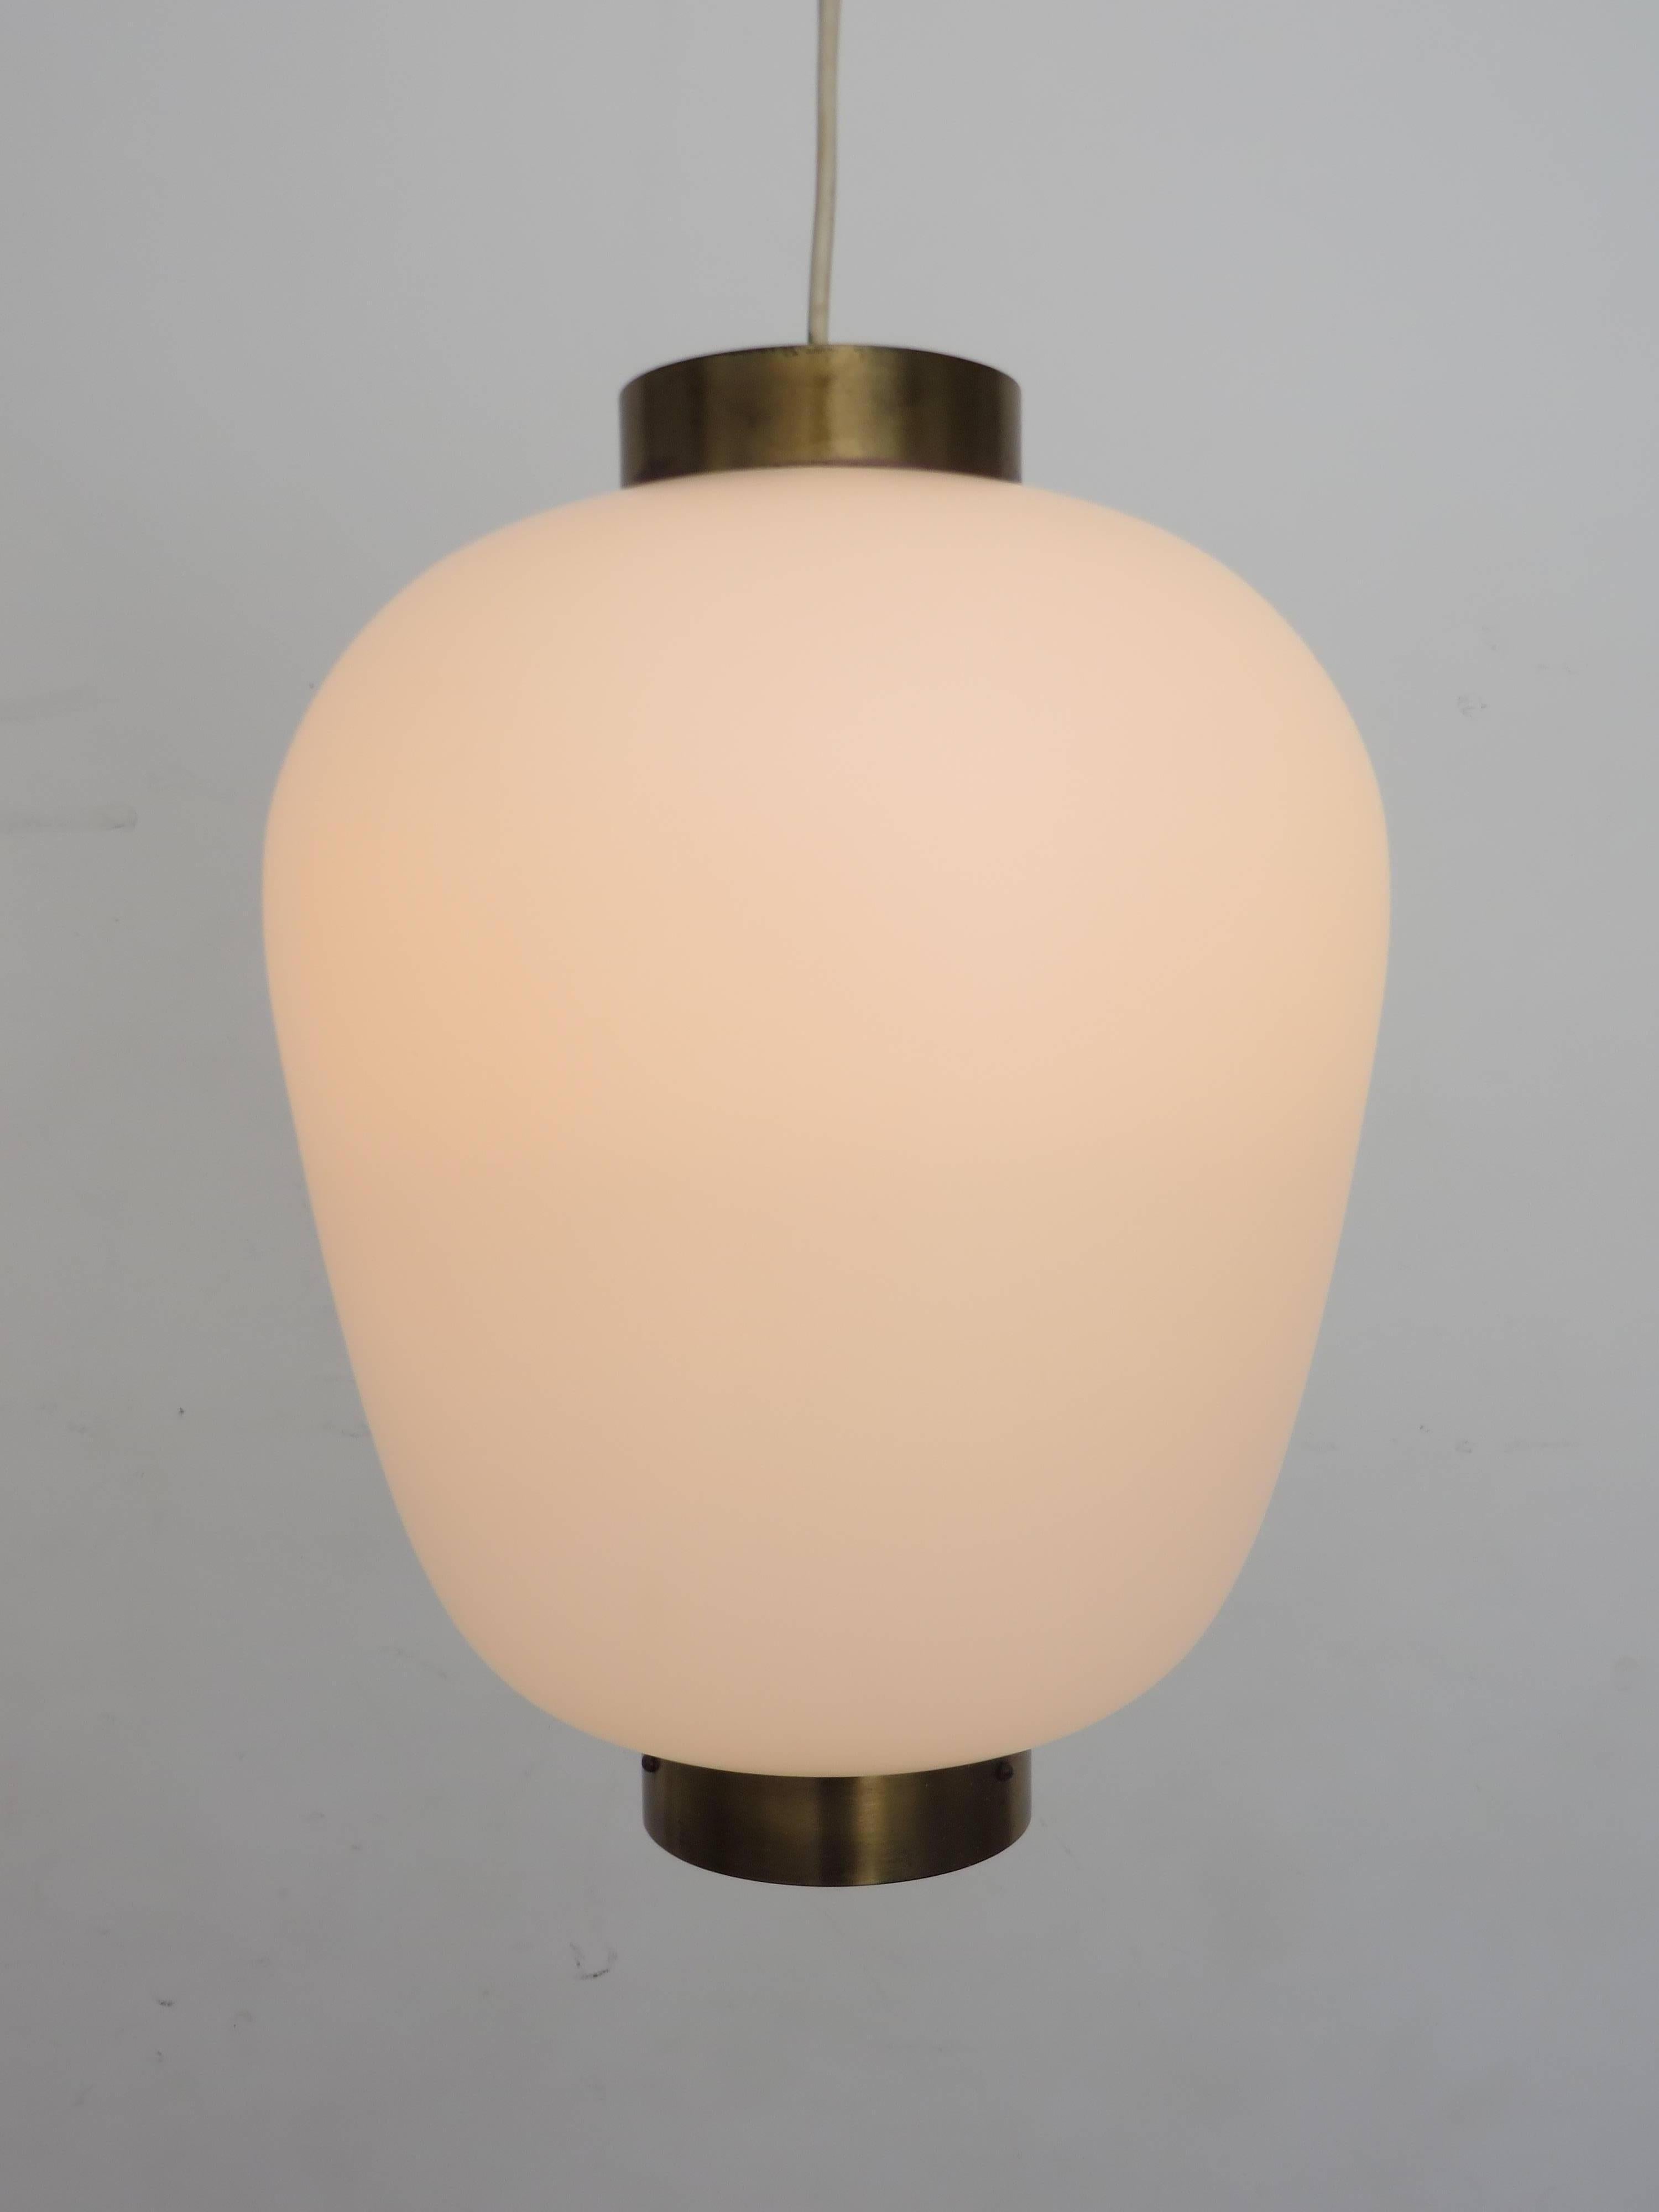 A pendant light by Stilnovo designed and manufactured in Italy, circa 1960s.
Brushed satin opaque glass diffuser and brass details top and bottom. Original ceiling cap.
A very Asian Minimalist reference.
Rewired for US junction boxes. Takes one